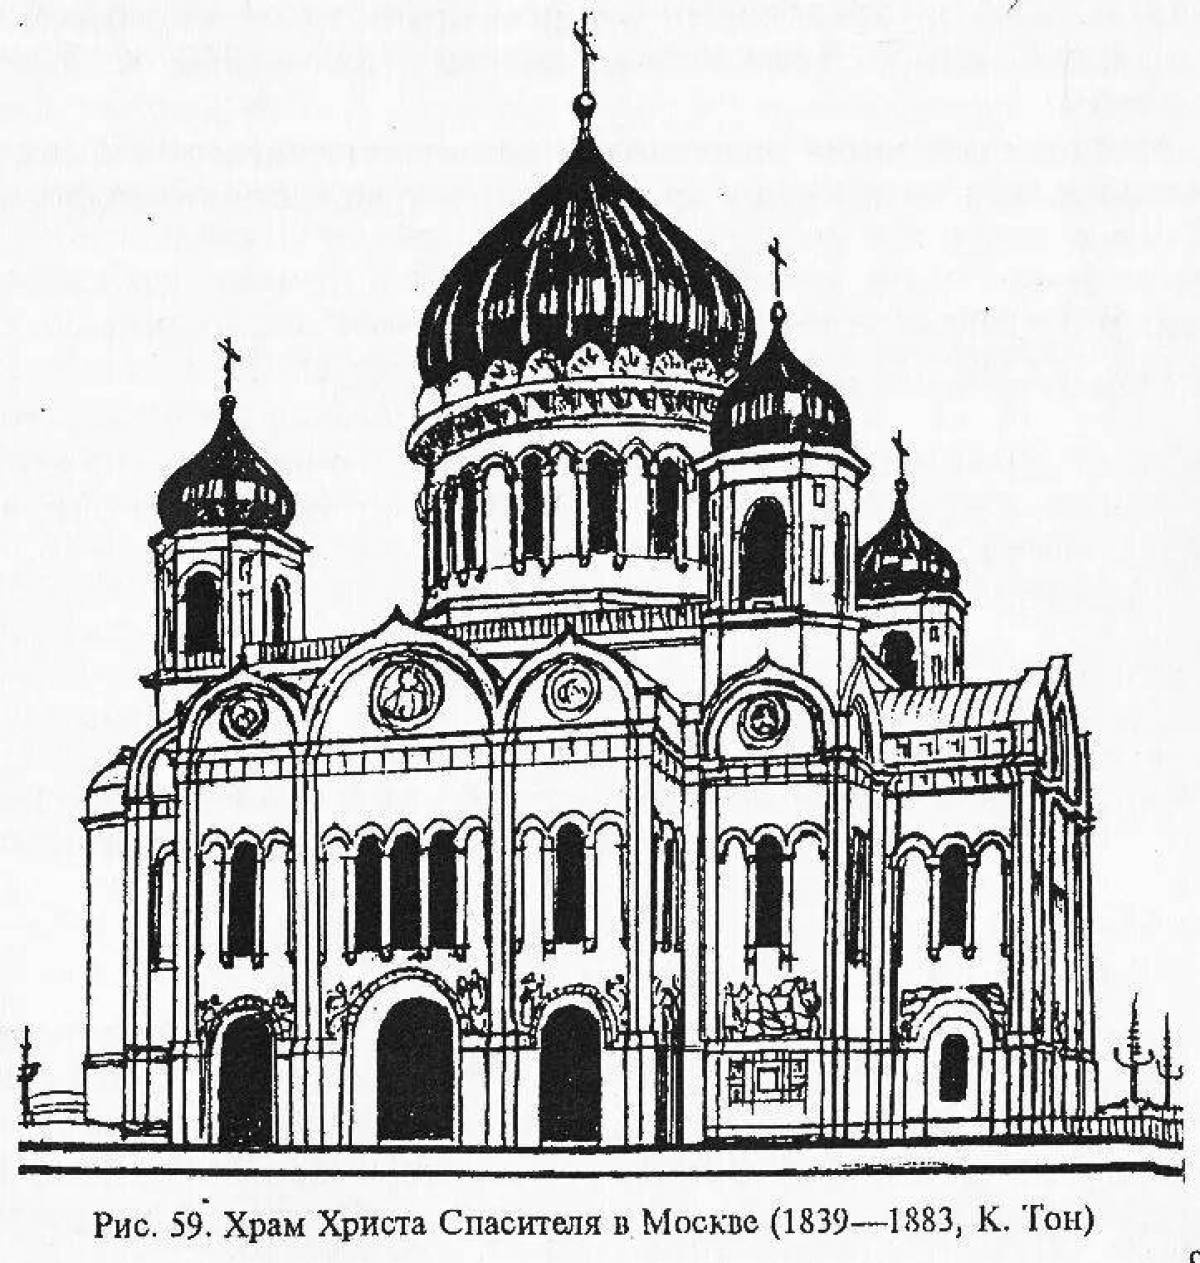 Coloring page of the magnificent temple of Christ the Savior